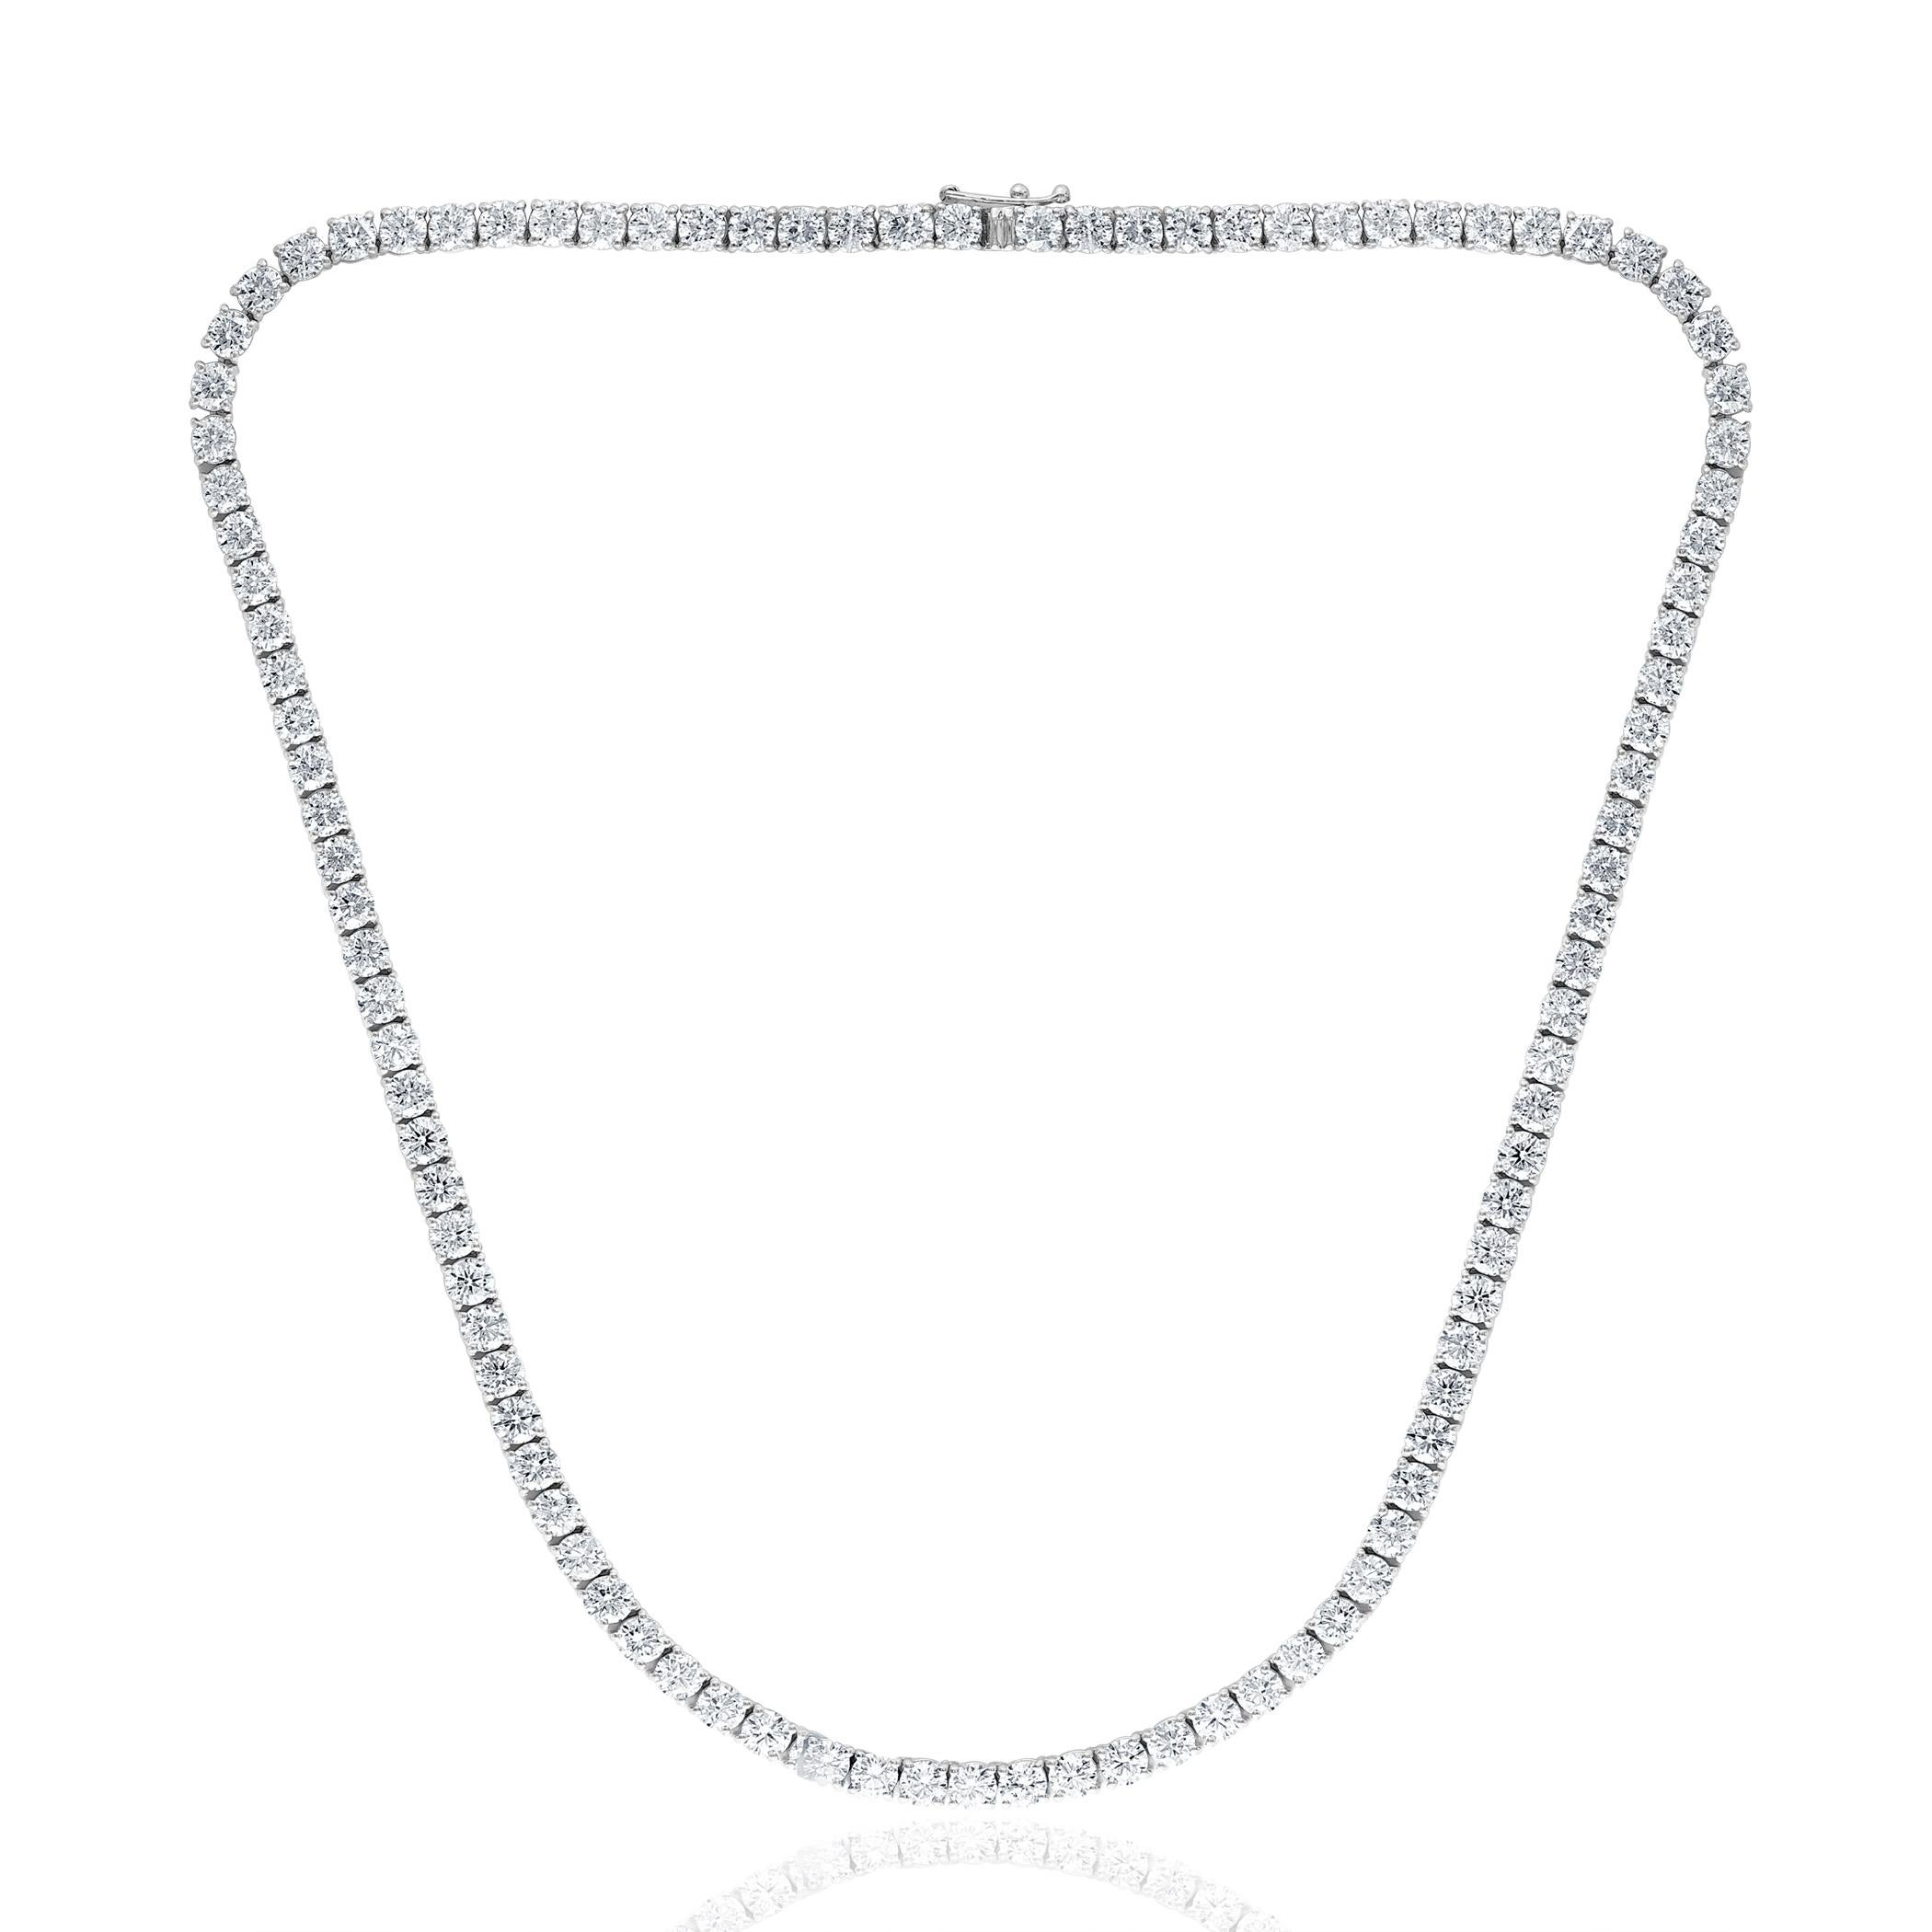 Modern 25.03 Carat Diamond Tennis Necklace in 14K White Gold For Sale